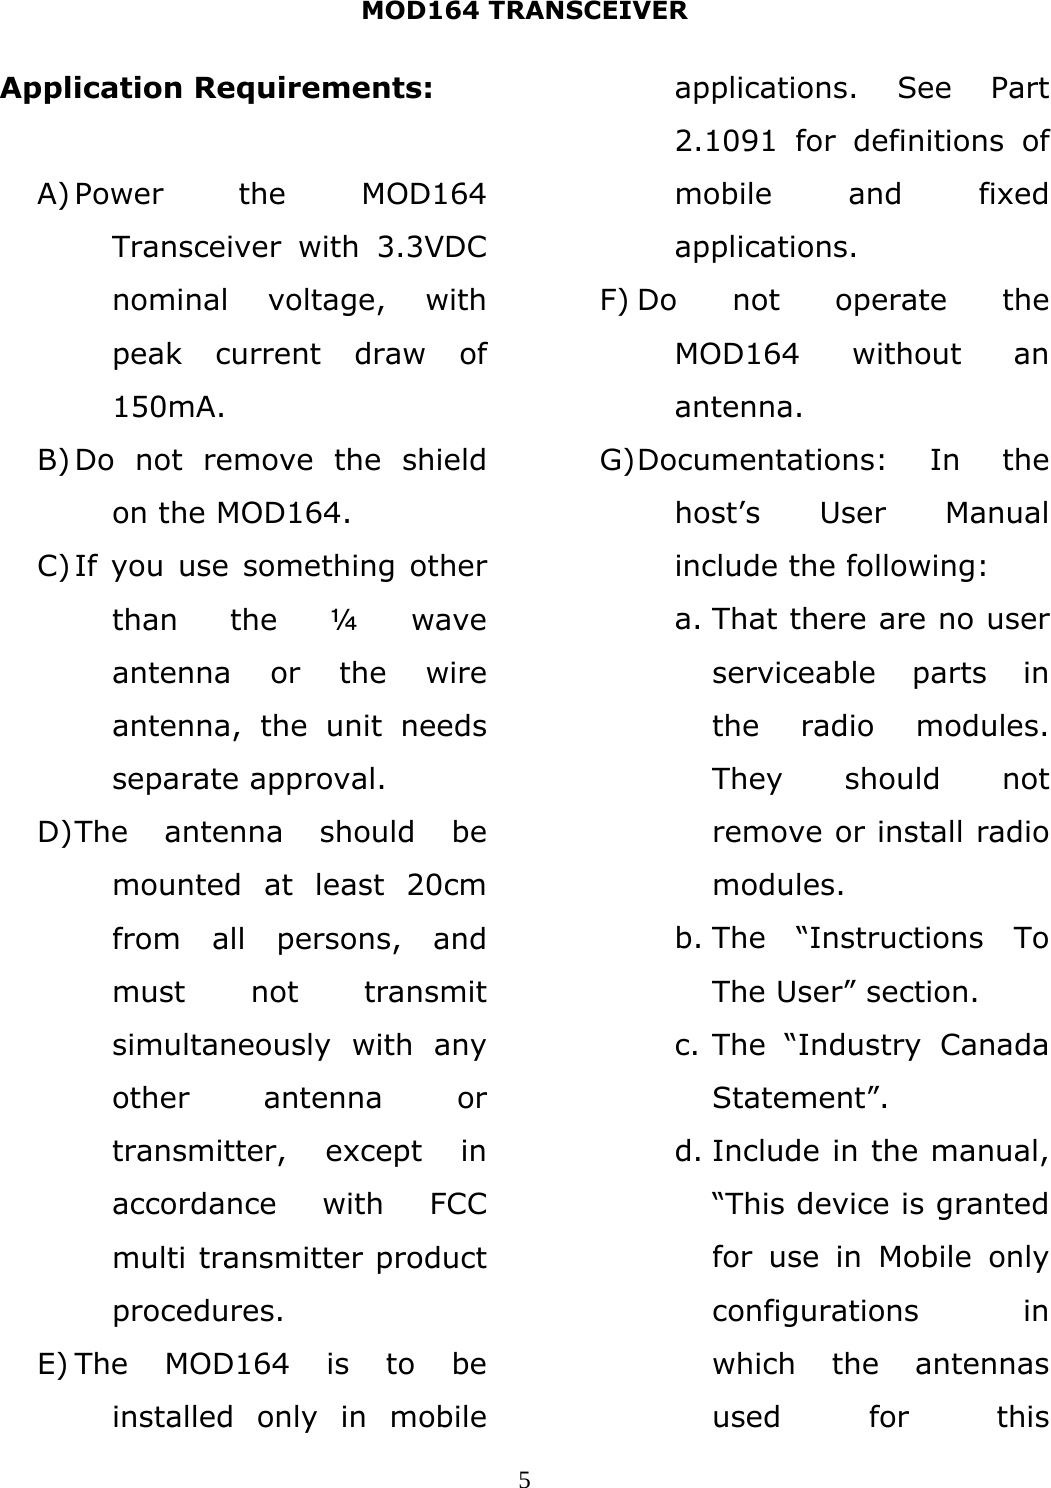 MOD164 TRANSCEIVER  5Application Requirements:  A) Power the MOD164 Transceiver with 3.3VDC nominal voltage, with peak current draw of 150mA. B) Do not remove the shield on the MOD164. C) If you use something other than the ¼ wave antenna or the wire antenna, the unit needs separate approval. D) The antenna should be mounted at least 20cm from all persons, and must not transmit simultaneously with any other antenna or transmitter, except in accordance with FCC multi transmitter product procedures. E) The MOD164 is to be installed only in mobile applications. See Part 2.1091 for definitions of mobile and fixed applications. F) Do not operate the MOD164 without an antenna. G) Documentations: In the host’s User Manual include the following: a. That there are no user serviceable parts in the radio modules. They should not remove or install radio modules. b. The “Instructions To The User” section. c. The “Industry Canada Statement”. d. Include in the manual, “This device is granted for use in Mobile only configurations in which the antennas used for this 